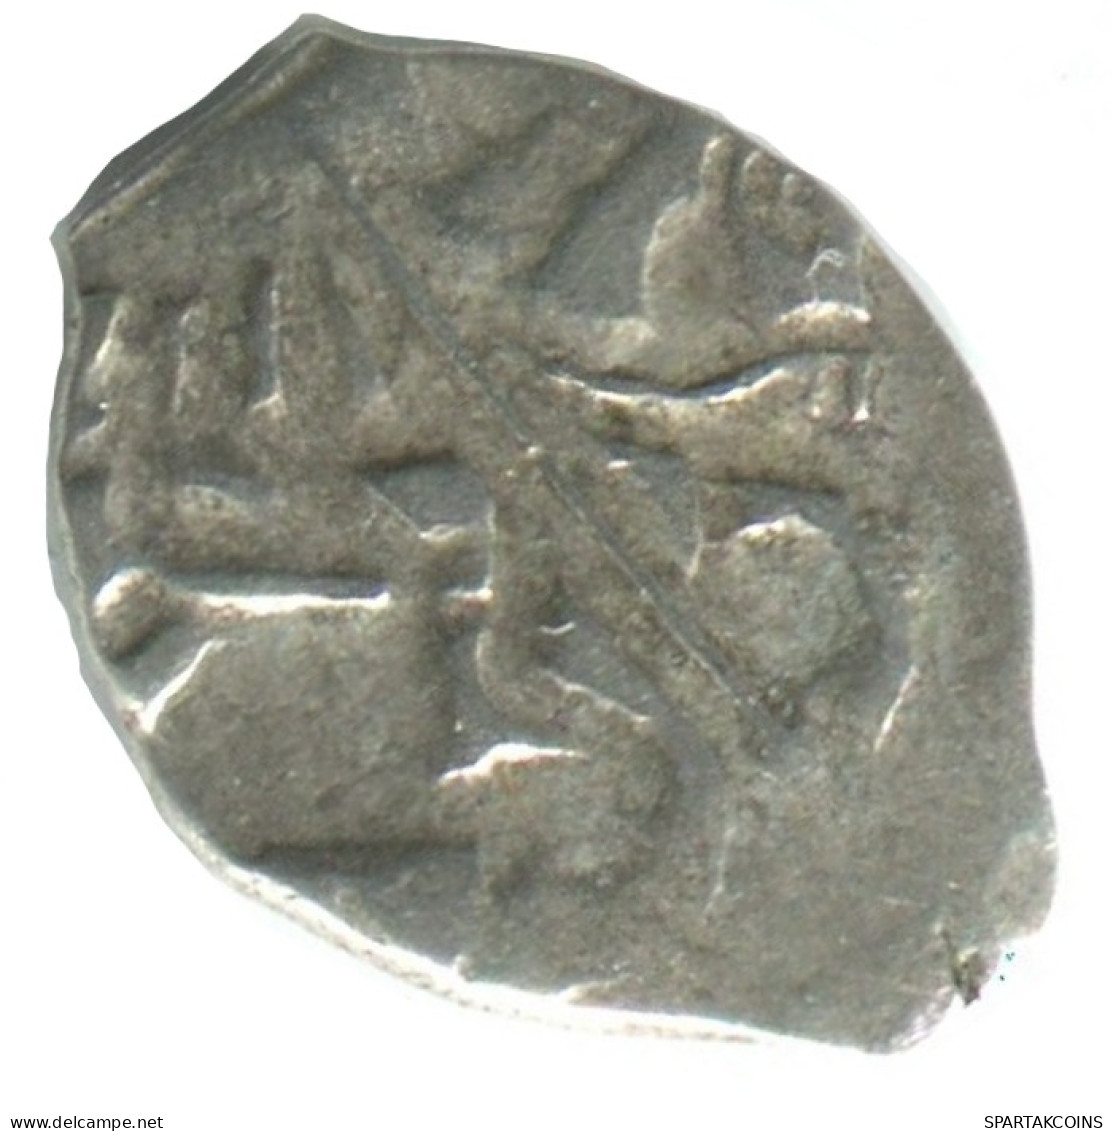 RUSSIE RUSSIA 1696-1717 KOPECK PETER I ARGENT 0.3g/9mm #AB989.10.F.A - Russie